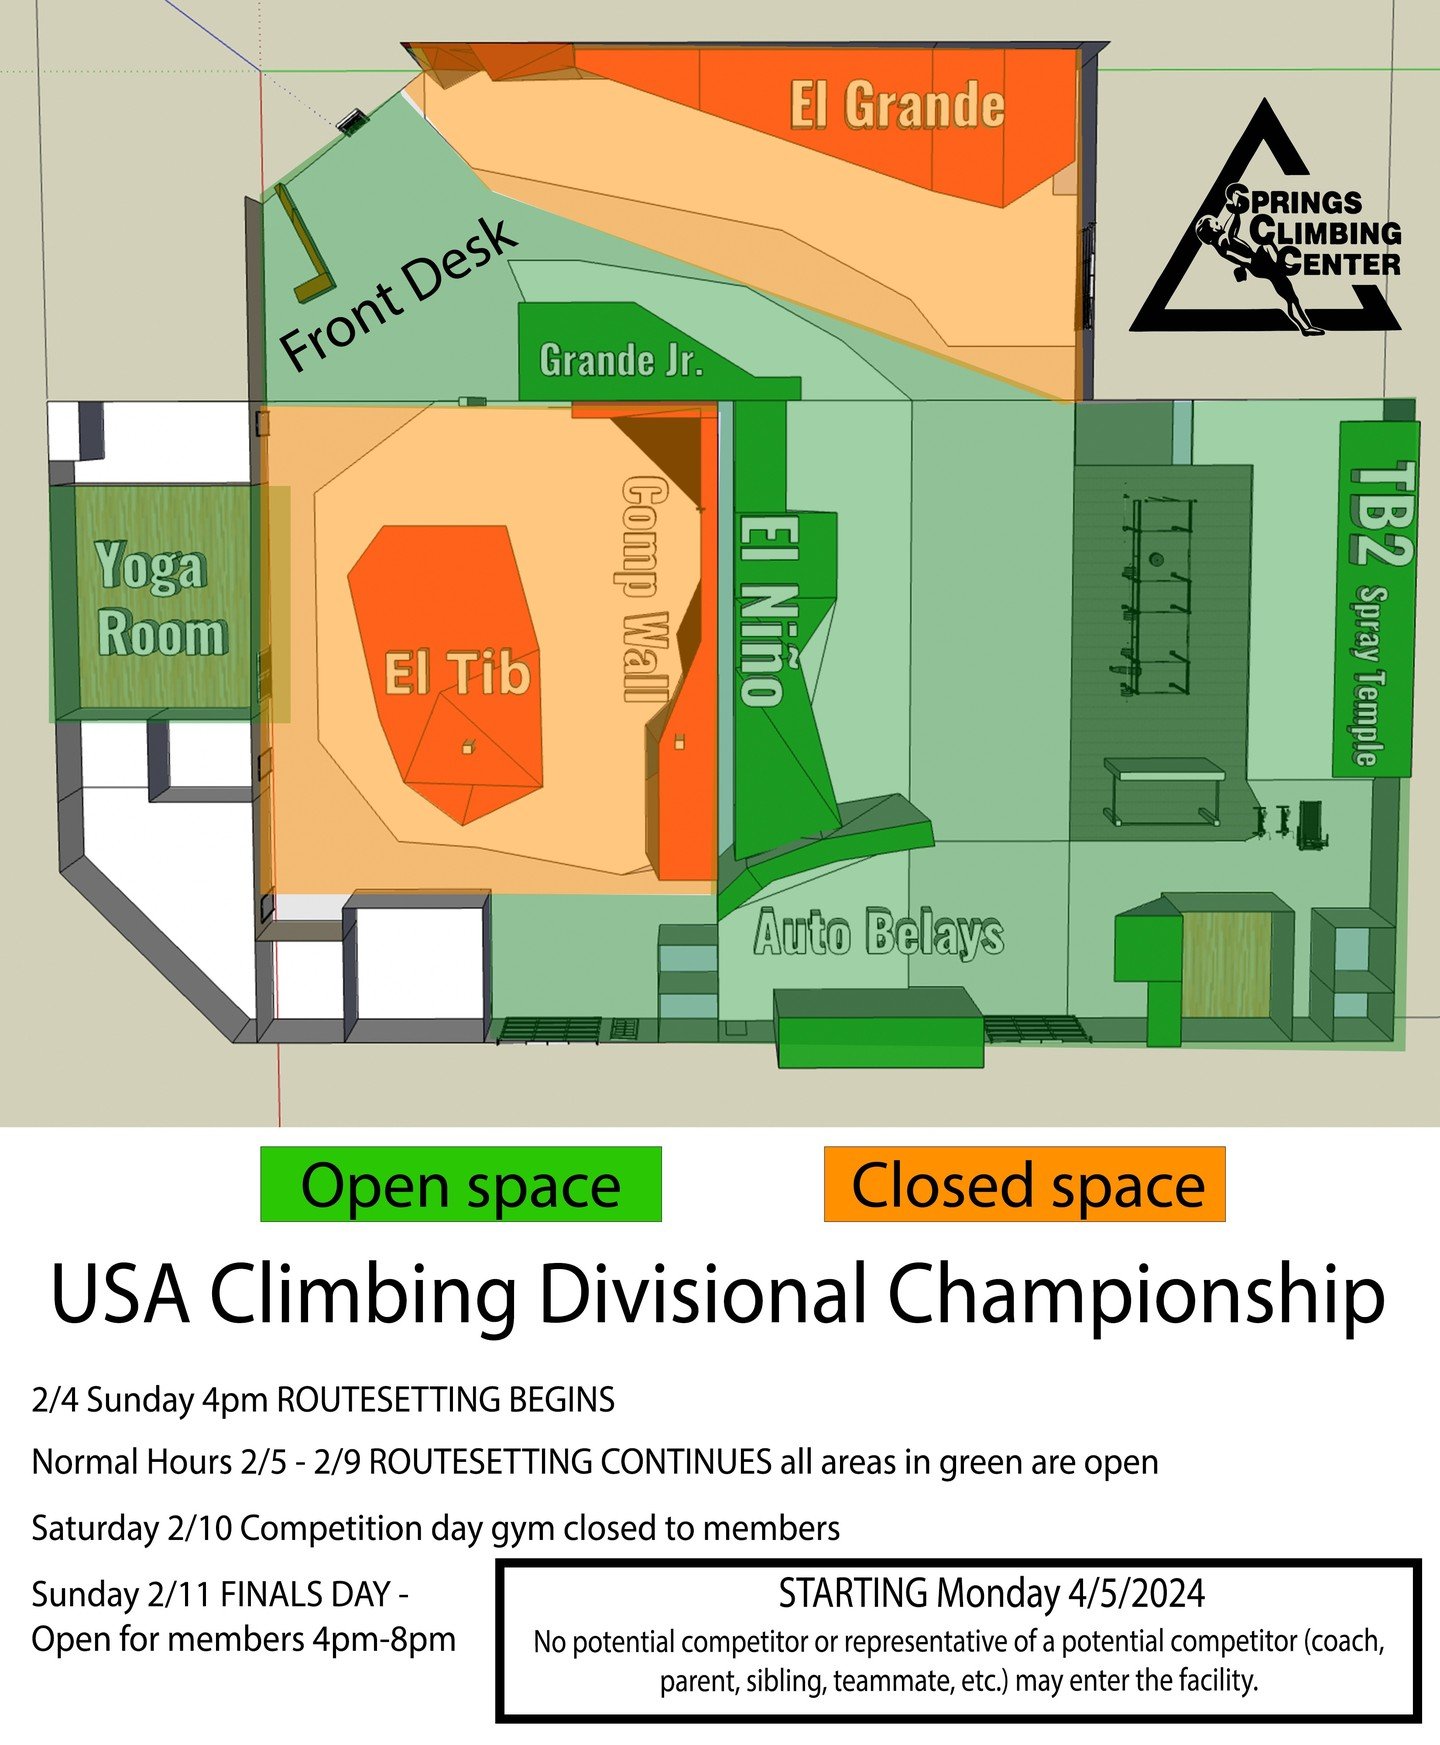 We will be hosting Youth Divisional Championships next weekend! 

Here is the setting schedule.

2/4 Sunday 4pm ROUTESETTING BEGINS

Normal Hours 2/5 - 2/9 ROUTESETTING CONTINUES all areas in green are open

Saturday 2/10 Competition day gym closed